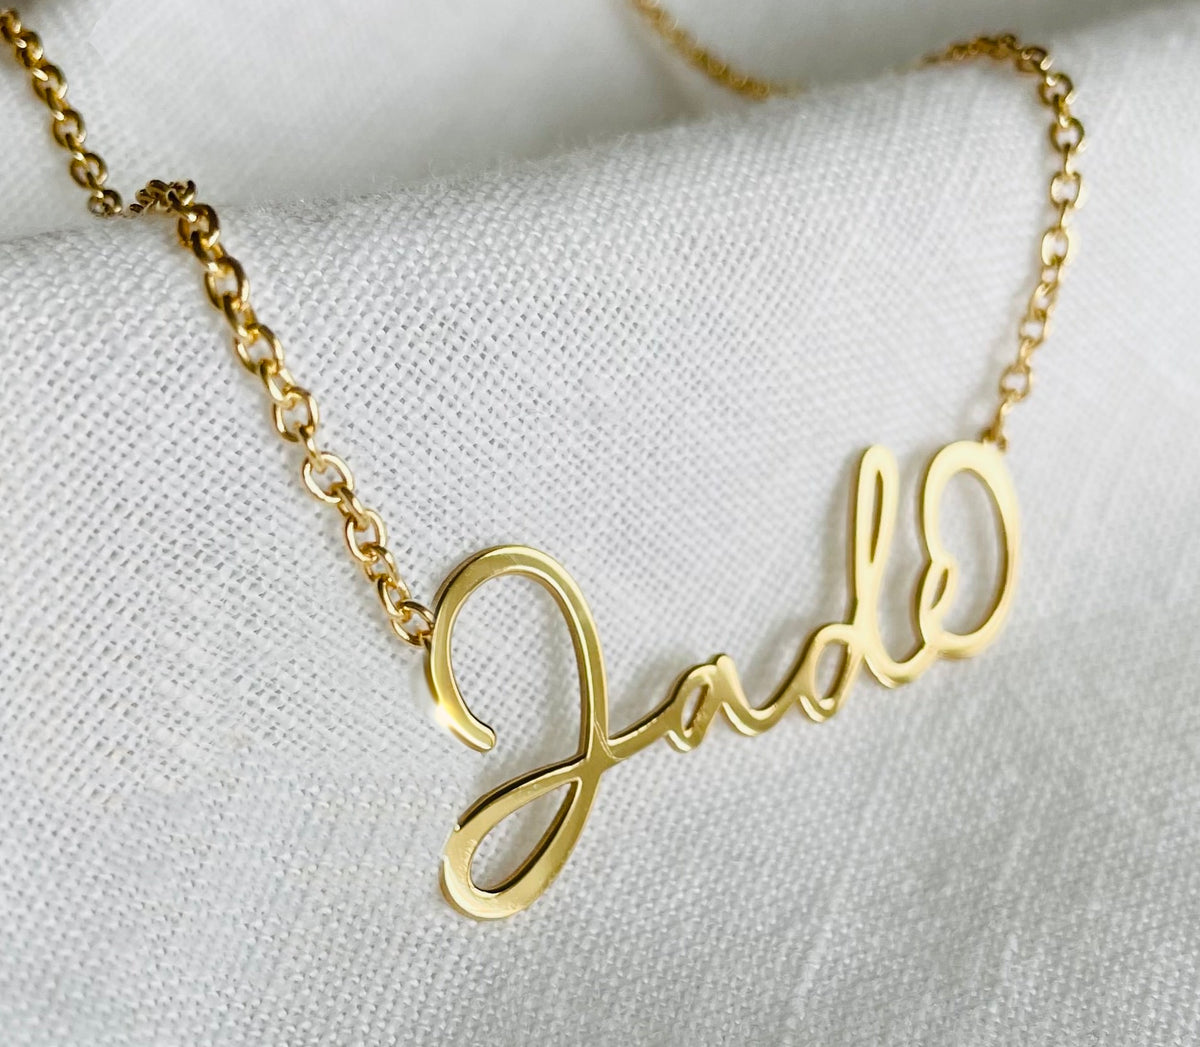 Bijou Script Personalized Name Necklace- Available in 14k, 10k & Sterling Silver